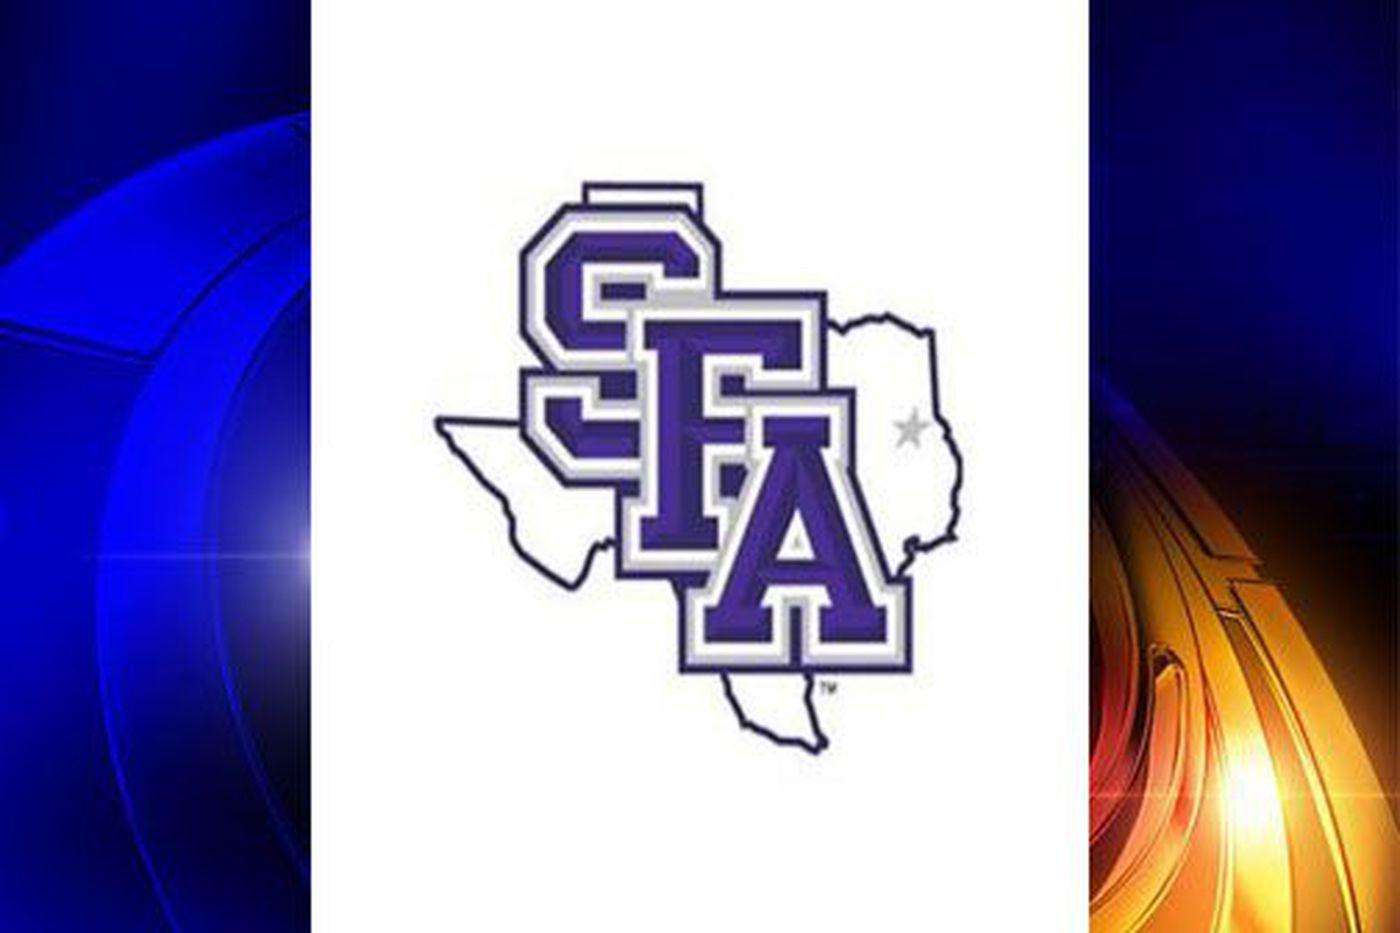 SFA Logo - SFA's popular old logo just took a few minutes of thought, didn't